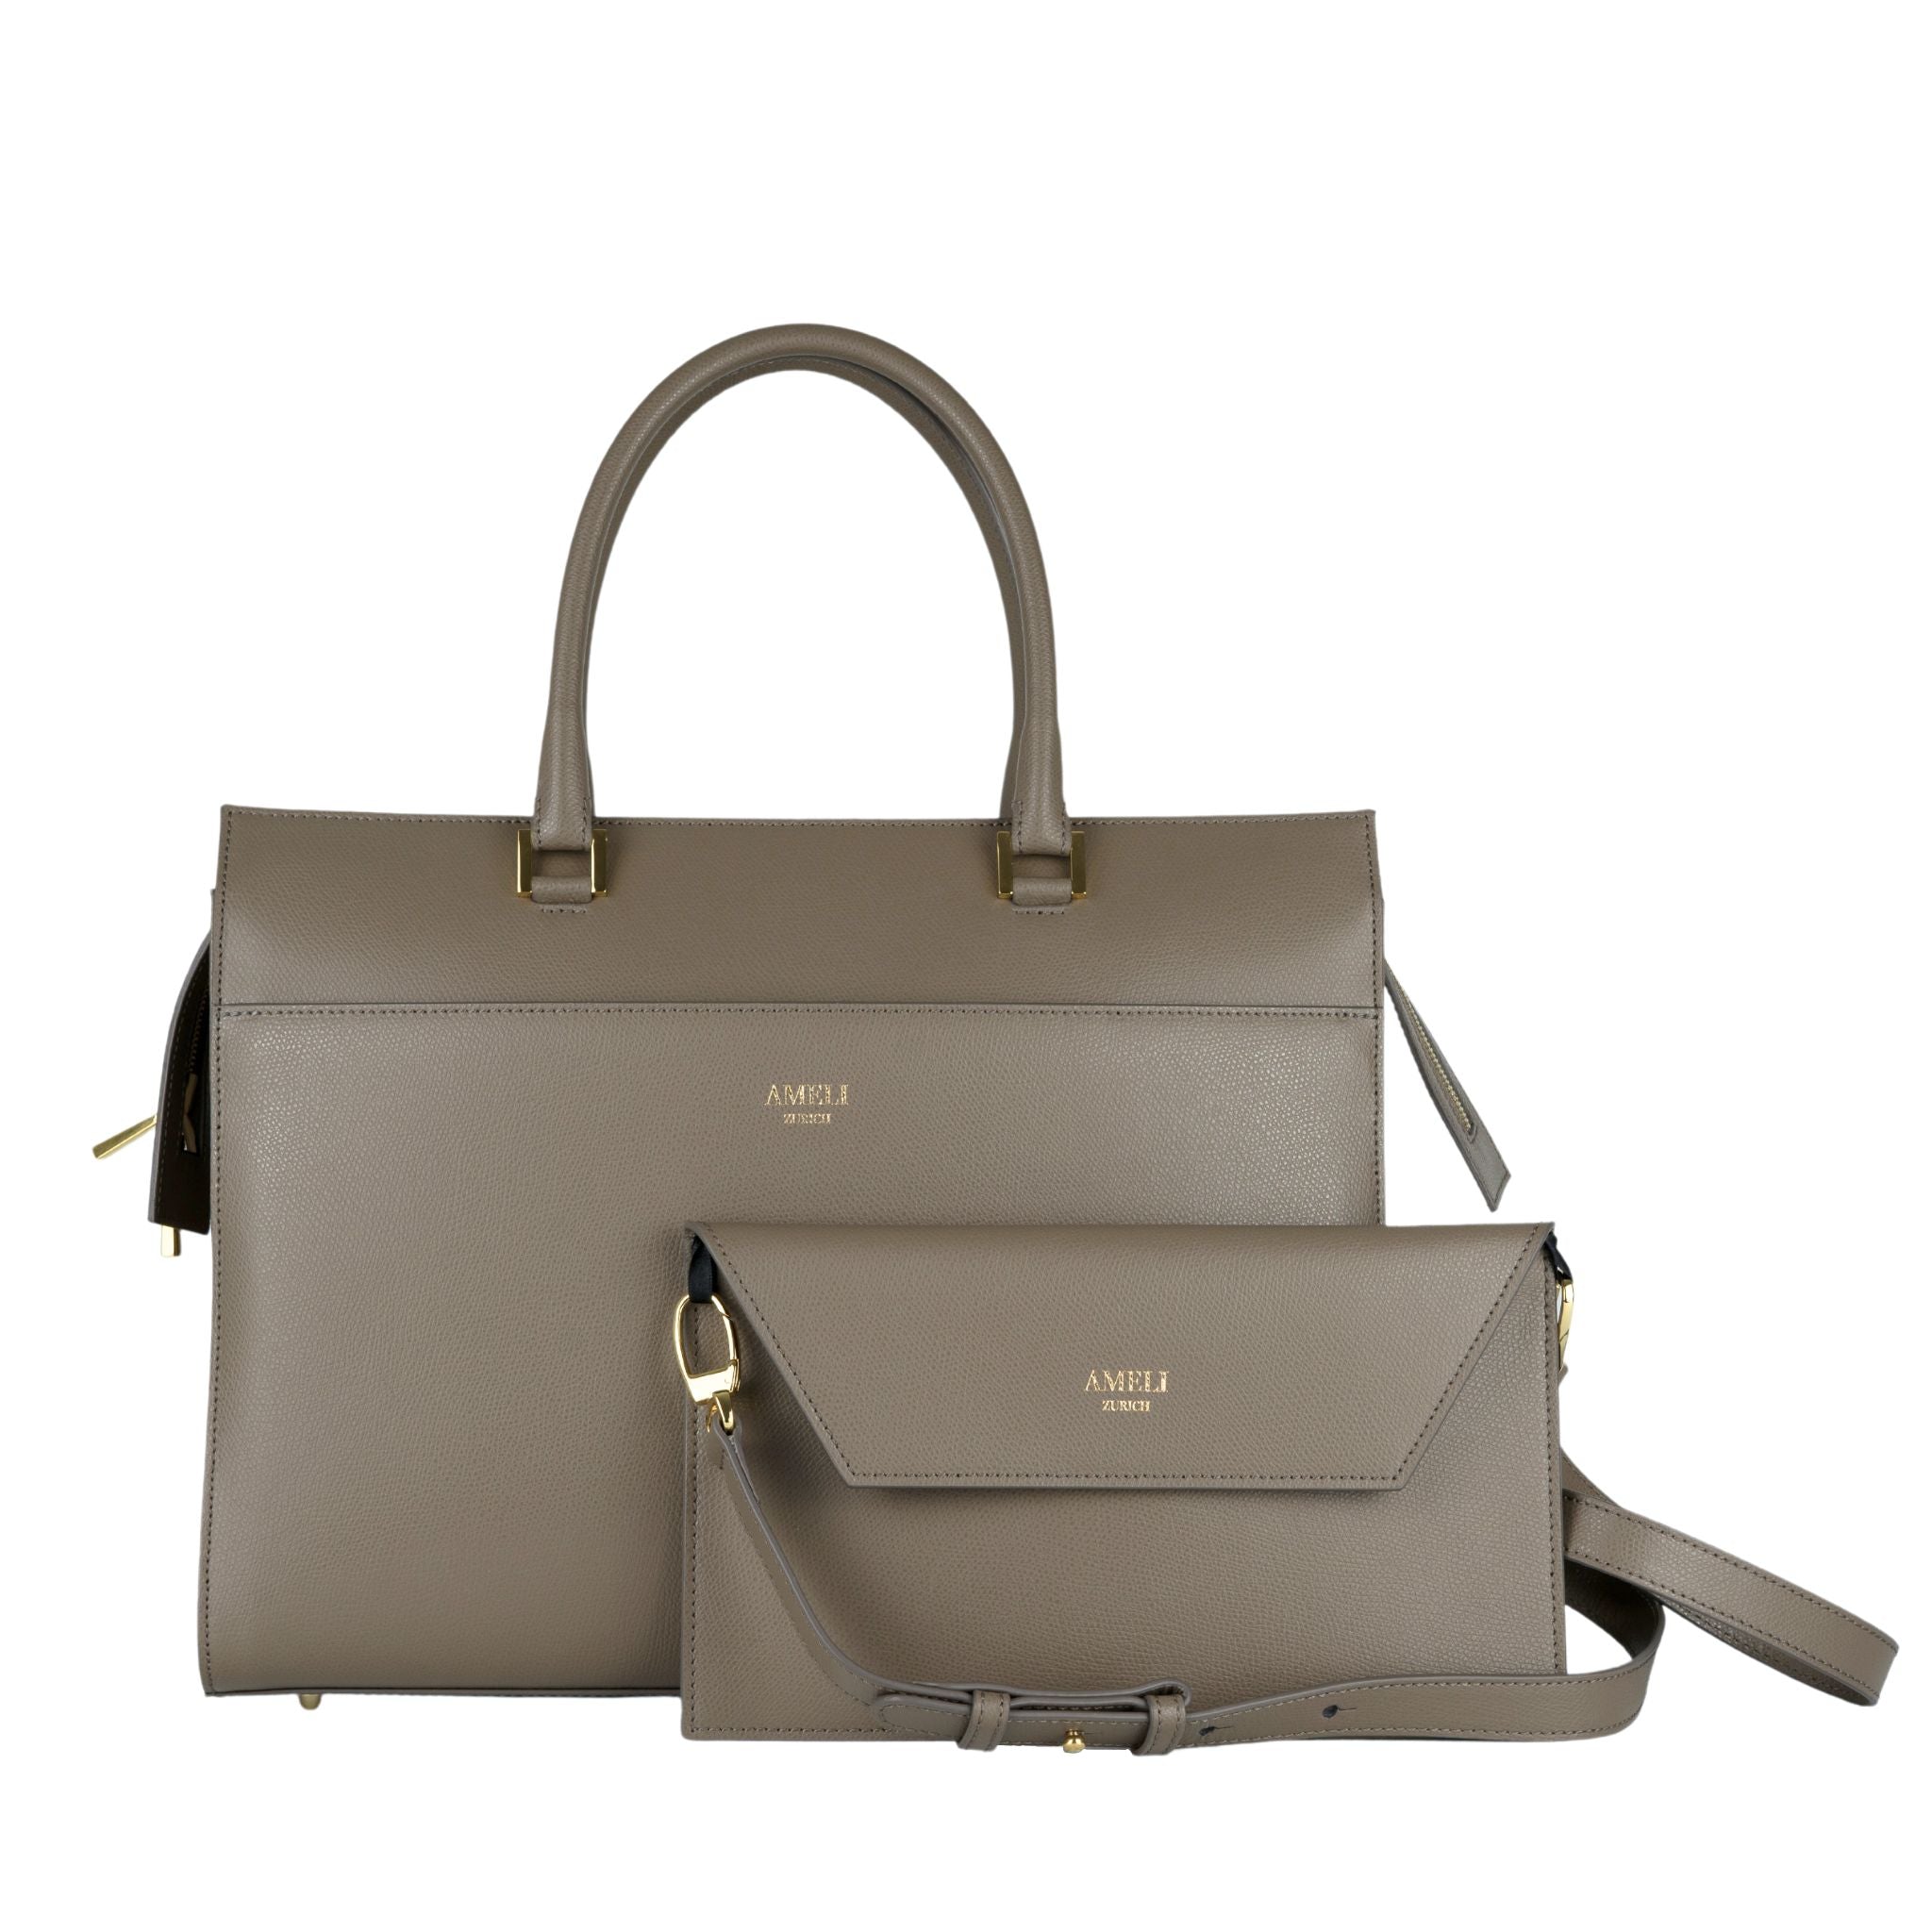 AMELI Zurich | CENTRAL | Greige | Pebbled Leather | Front + Clutch